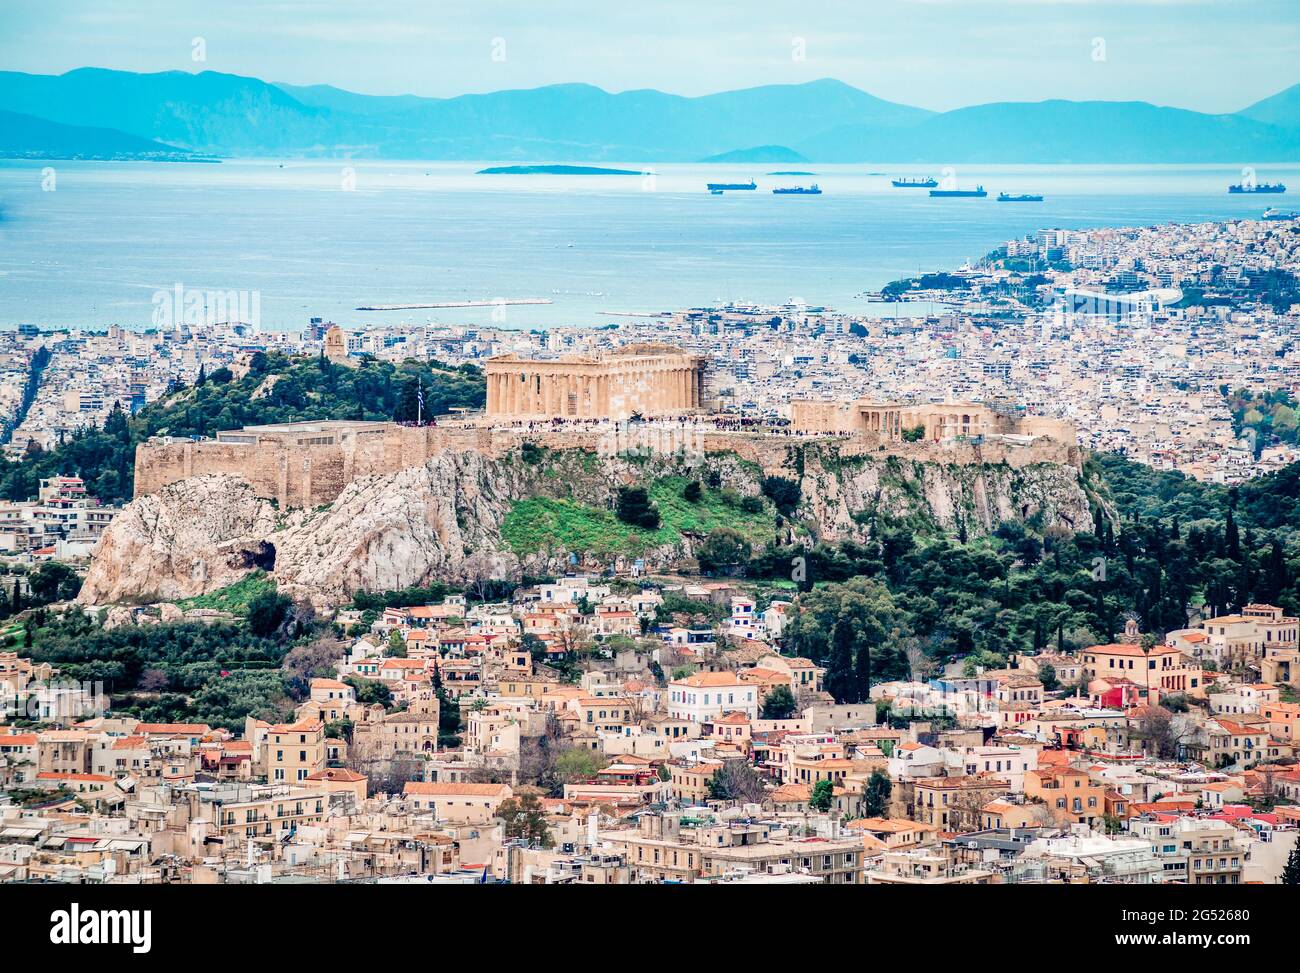 View of the Acropolis of Athens seen from Lycabettus Hill. The Filopappos Hill and the Saronic gulf and Piraeus are in the background. Stock Photo